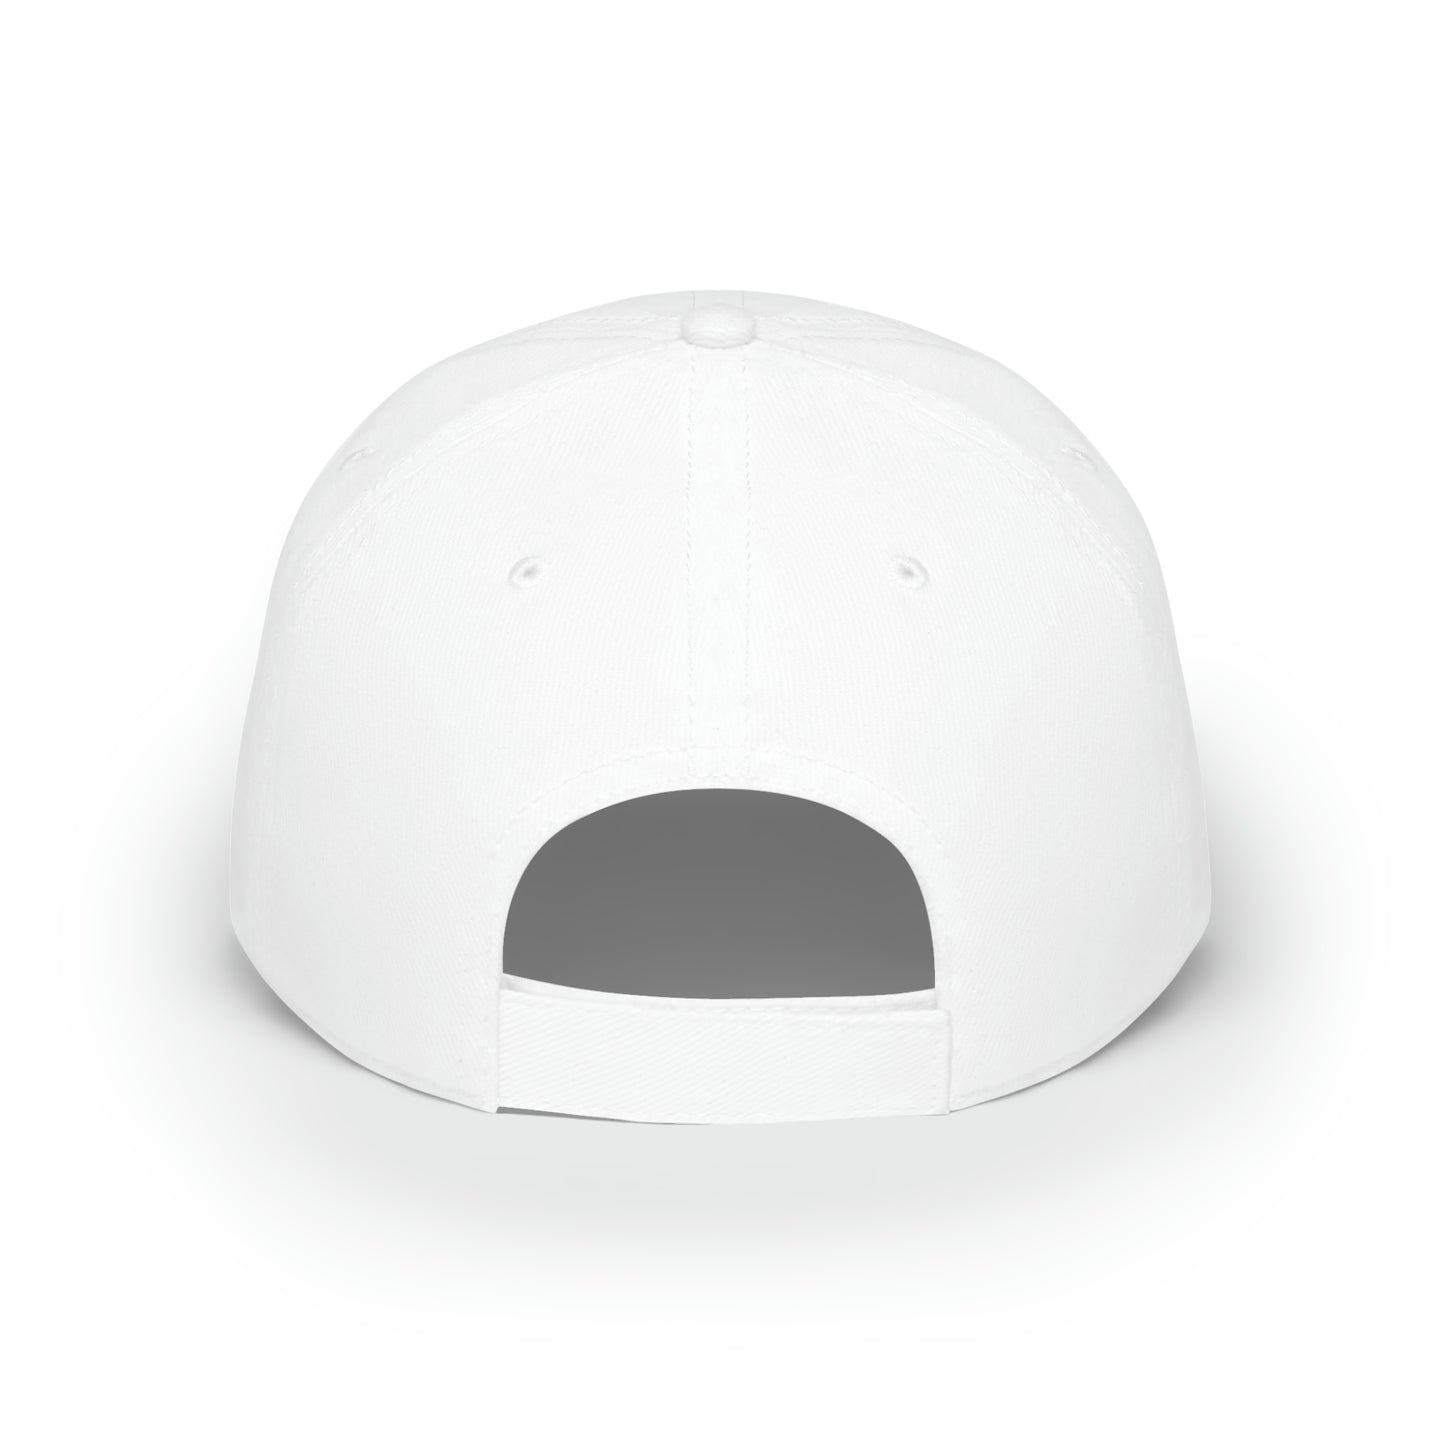 DBBH Hat #2 (White Color)